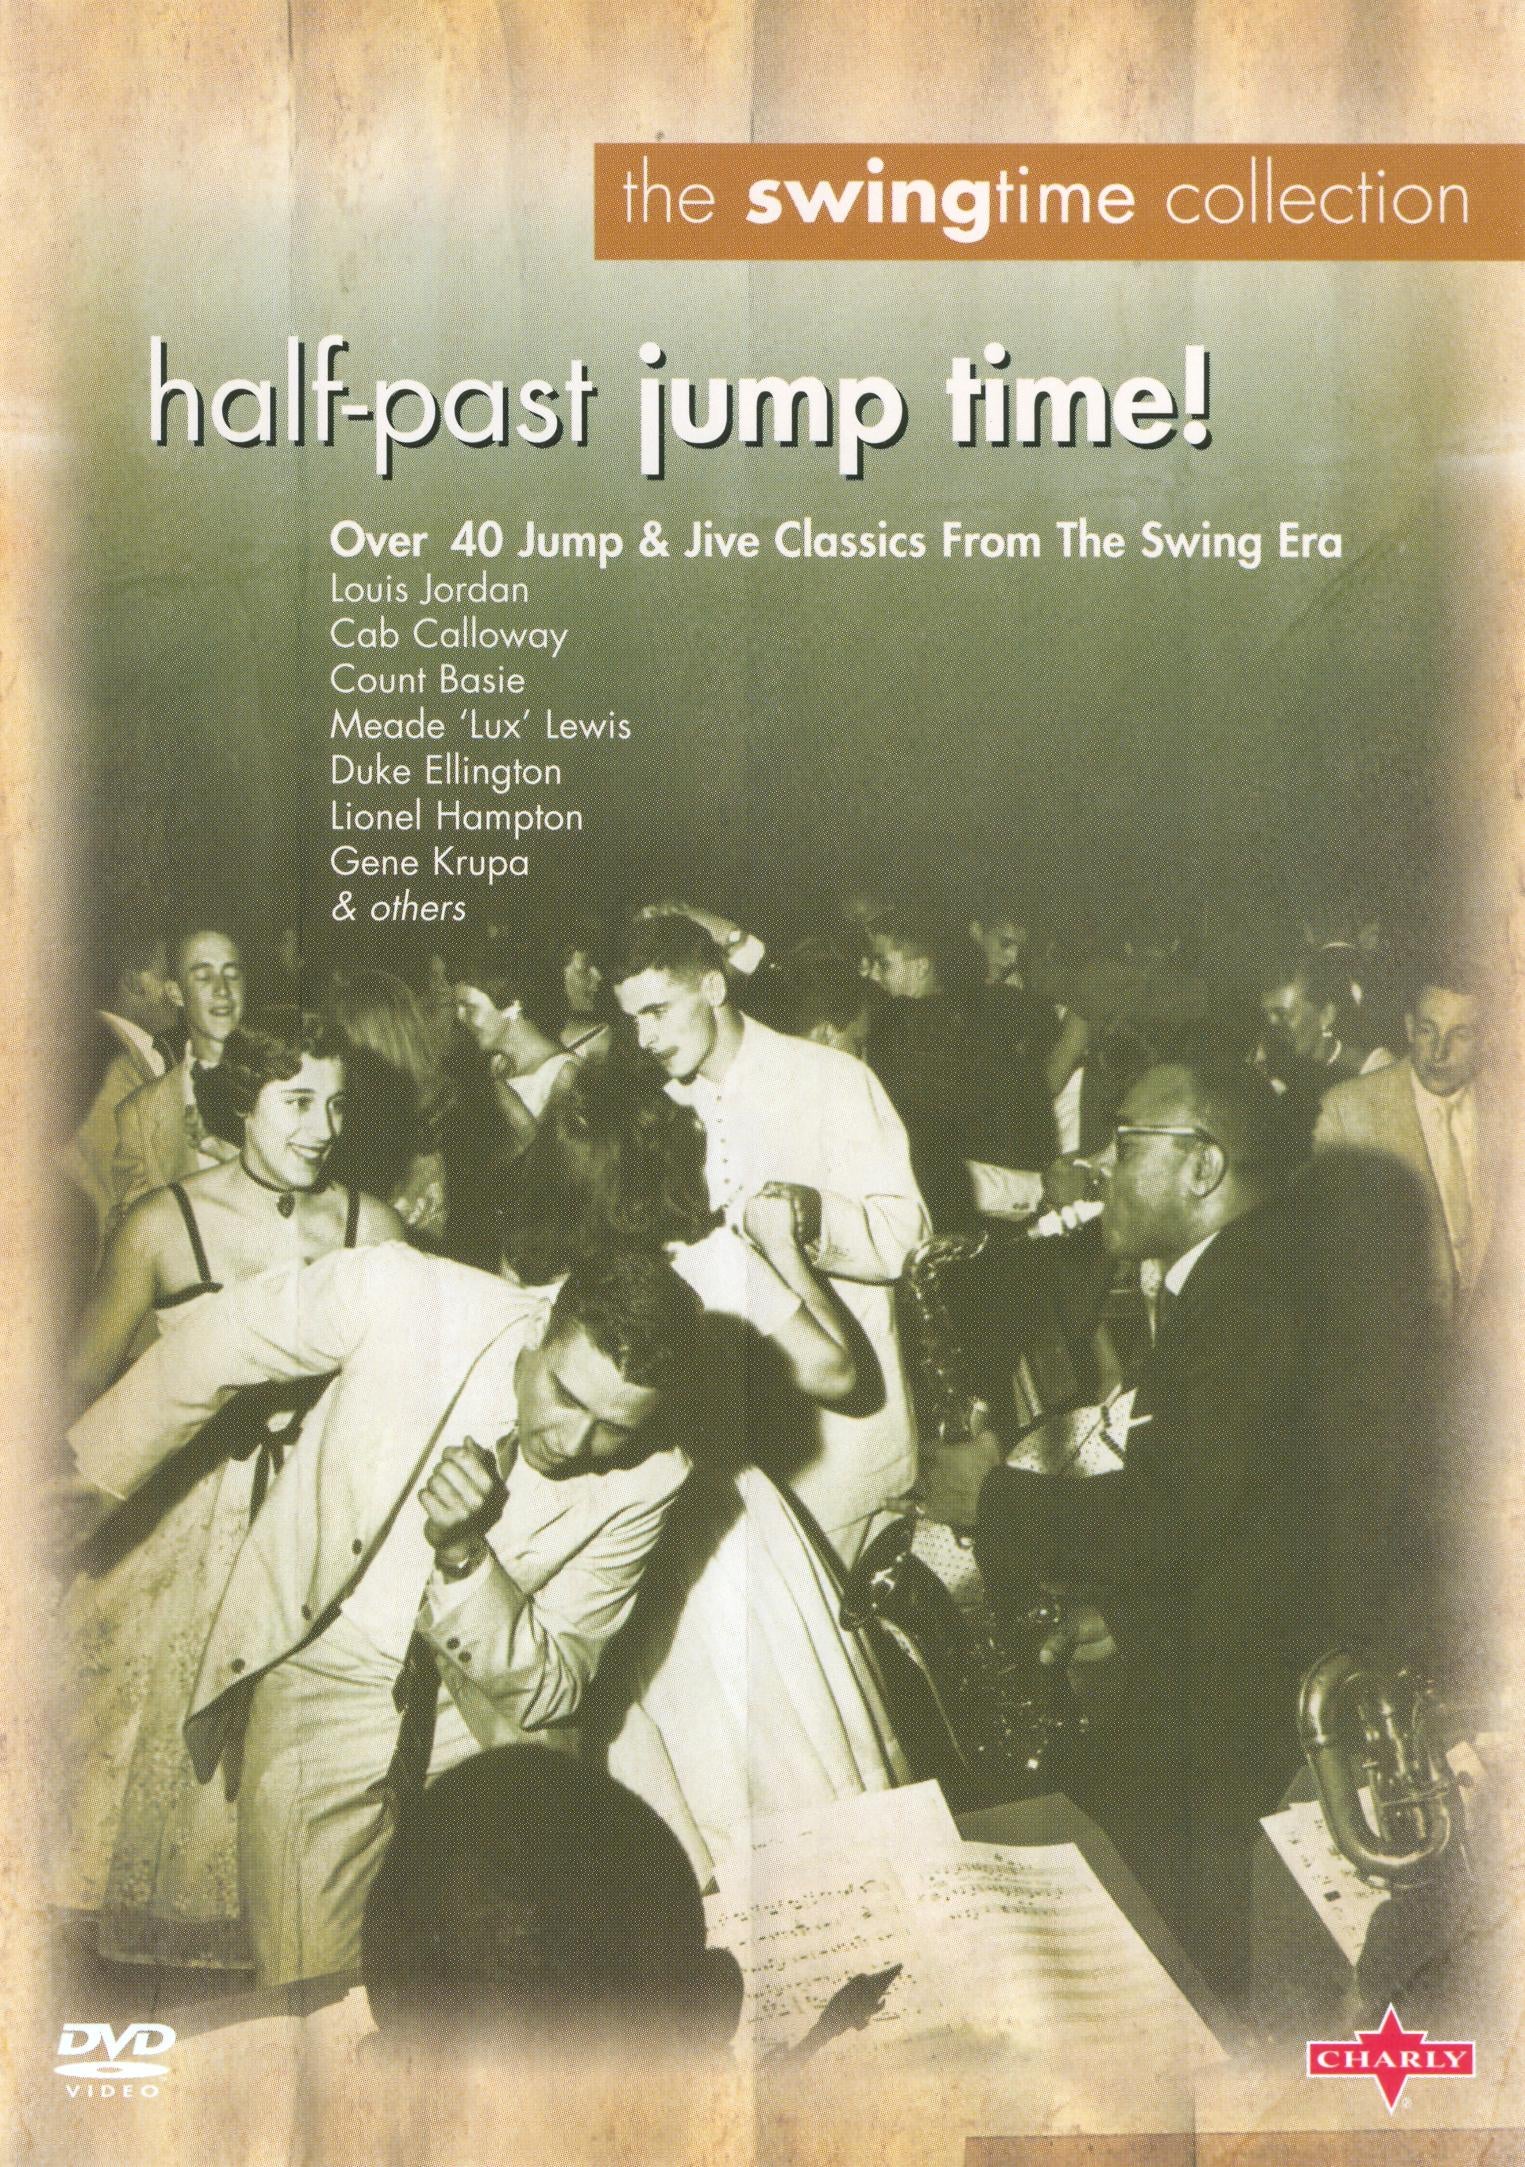 Swing Time Collection, Vol. 1: Half-Past Jump Time!